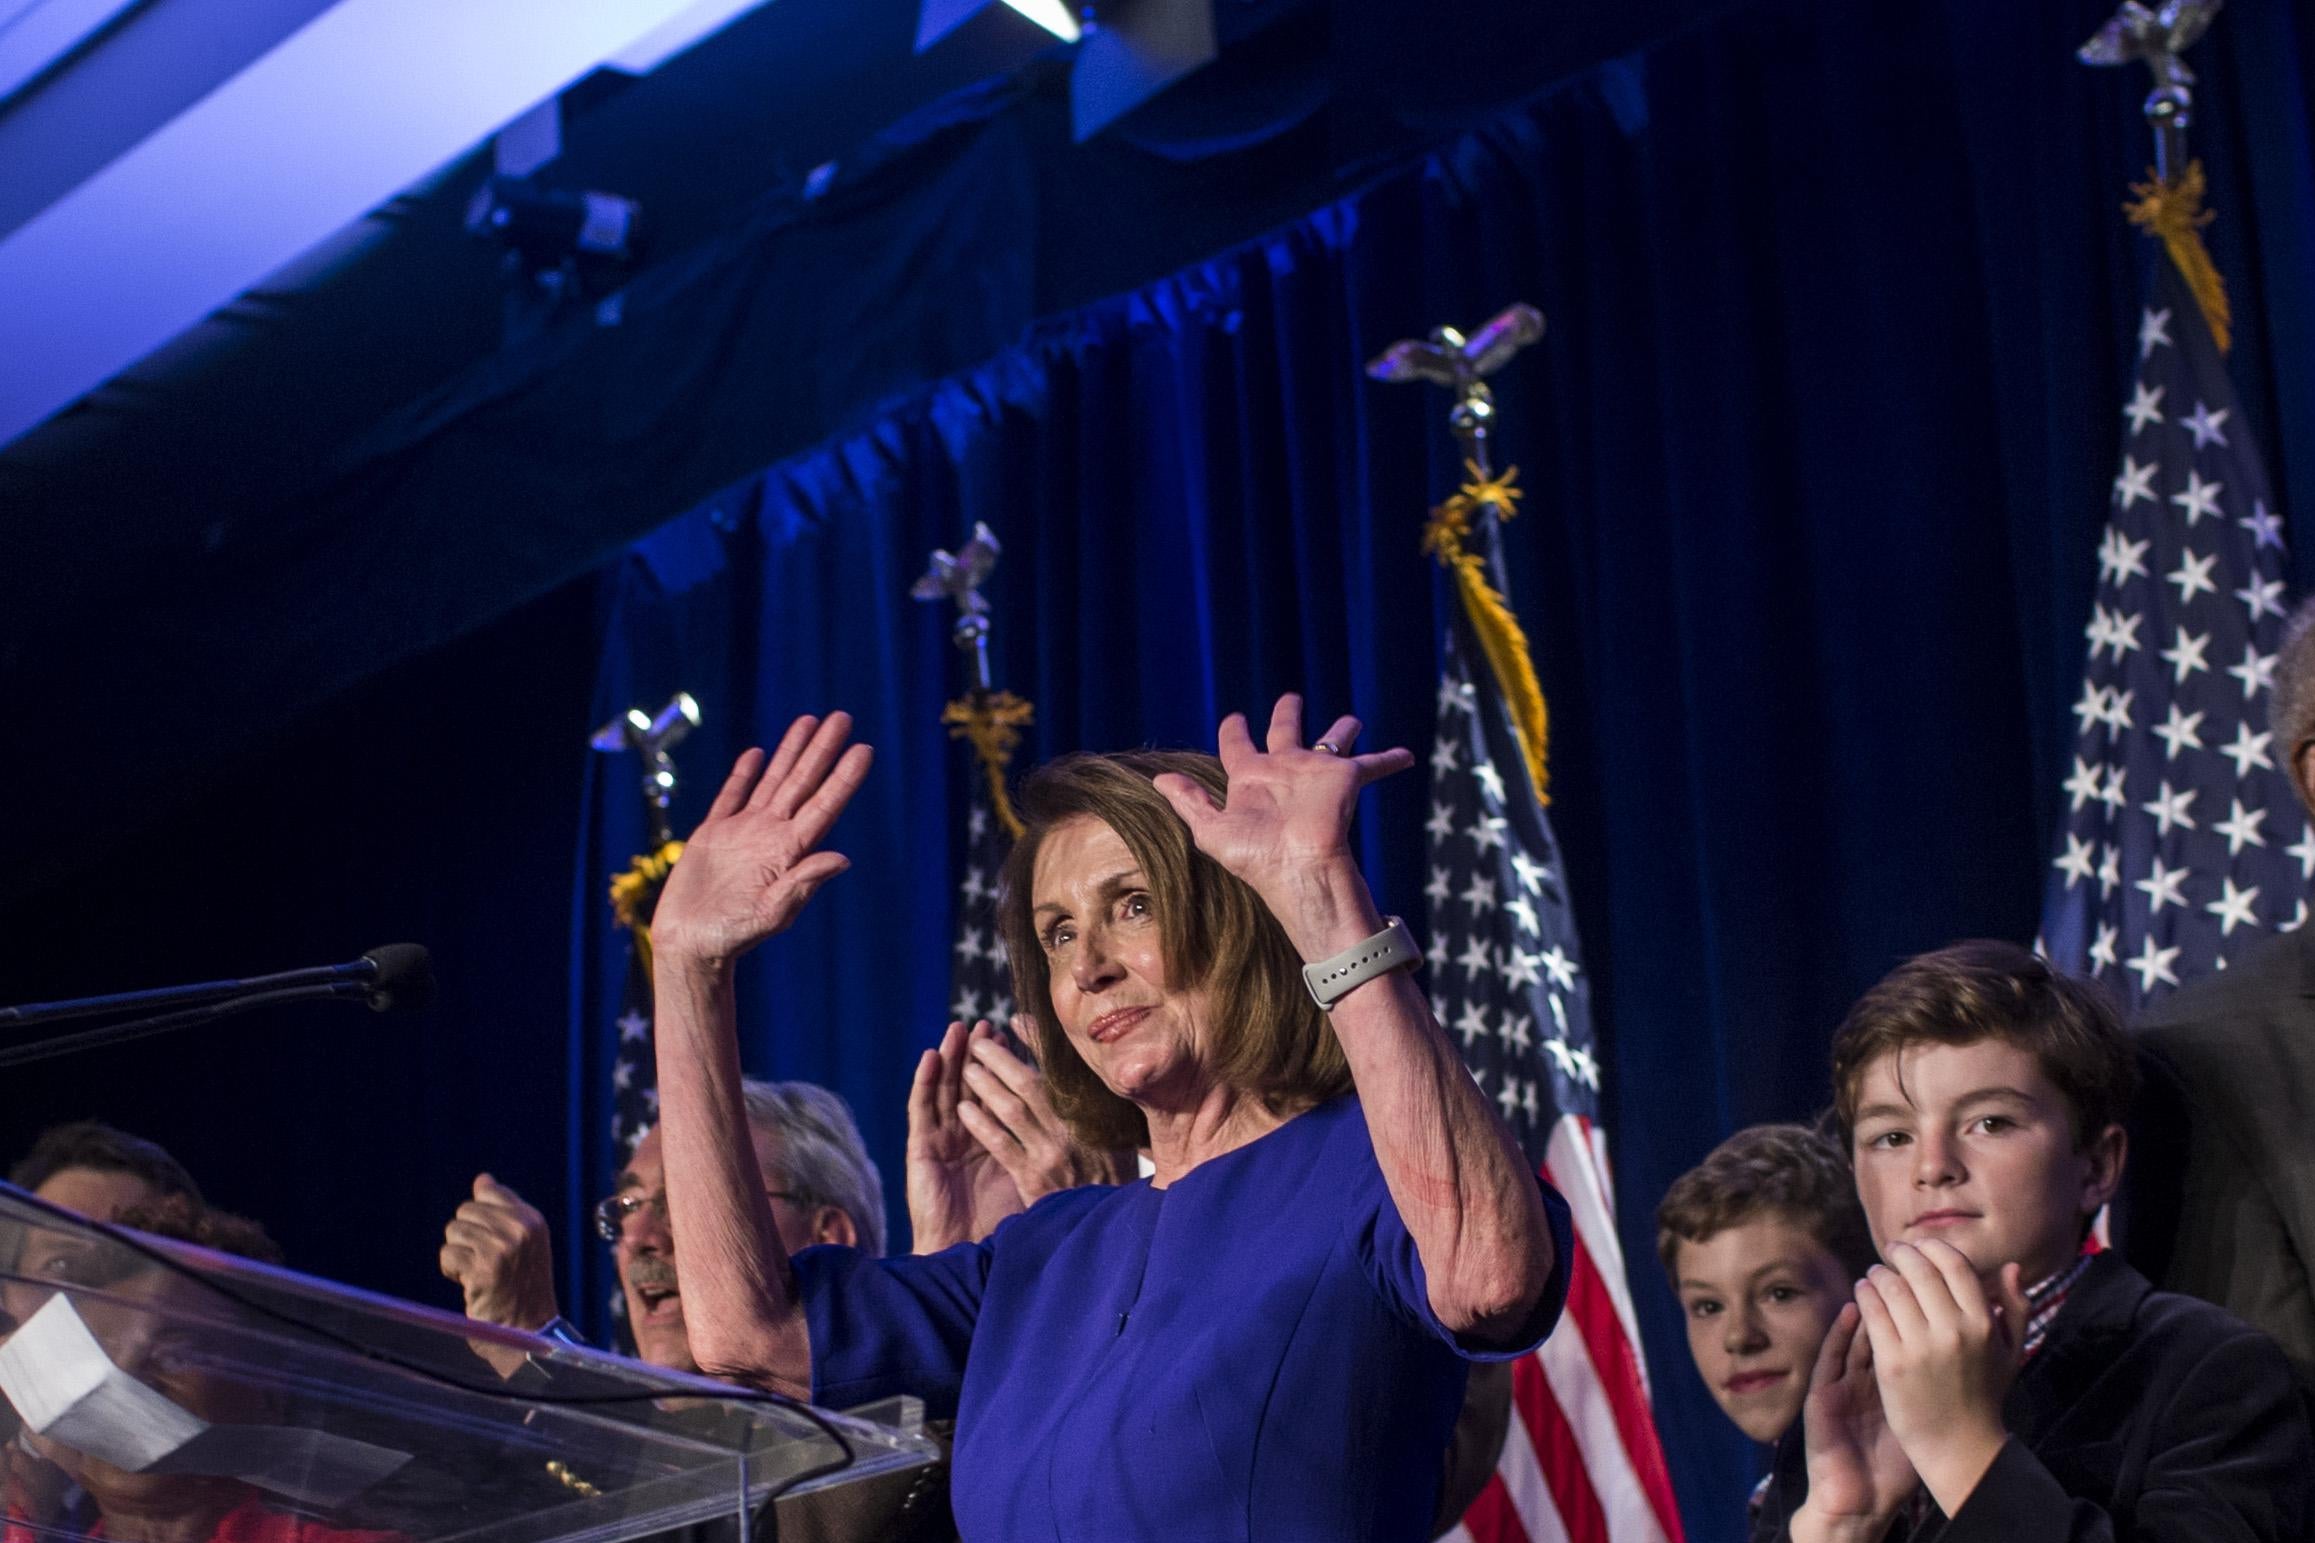 Nancy Pelosi raises her hands from behind a podium.